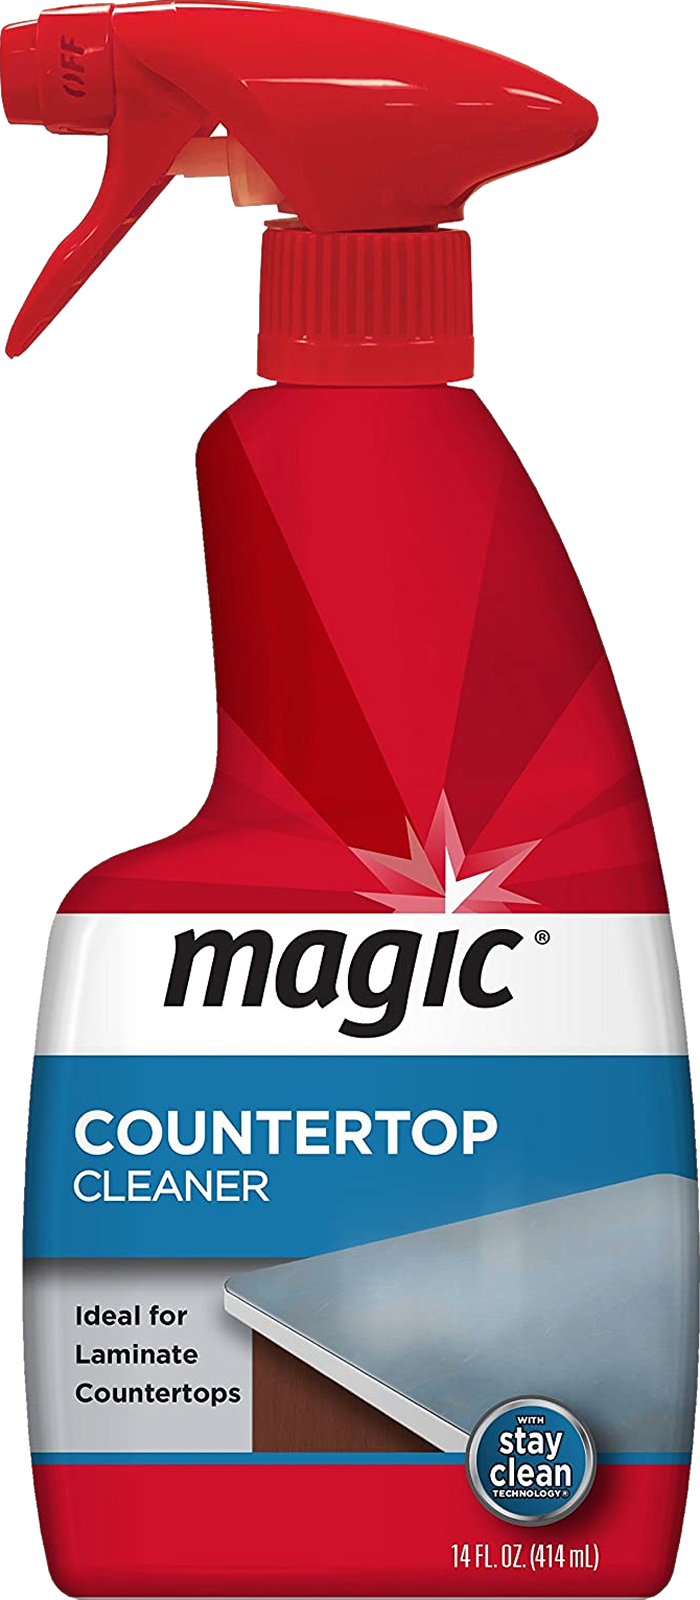 https://www.topclasscarpentry.com/images/cleaning-products/magic-countertop-cleaner.png